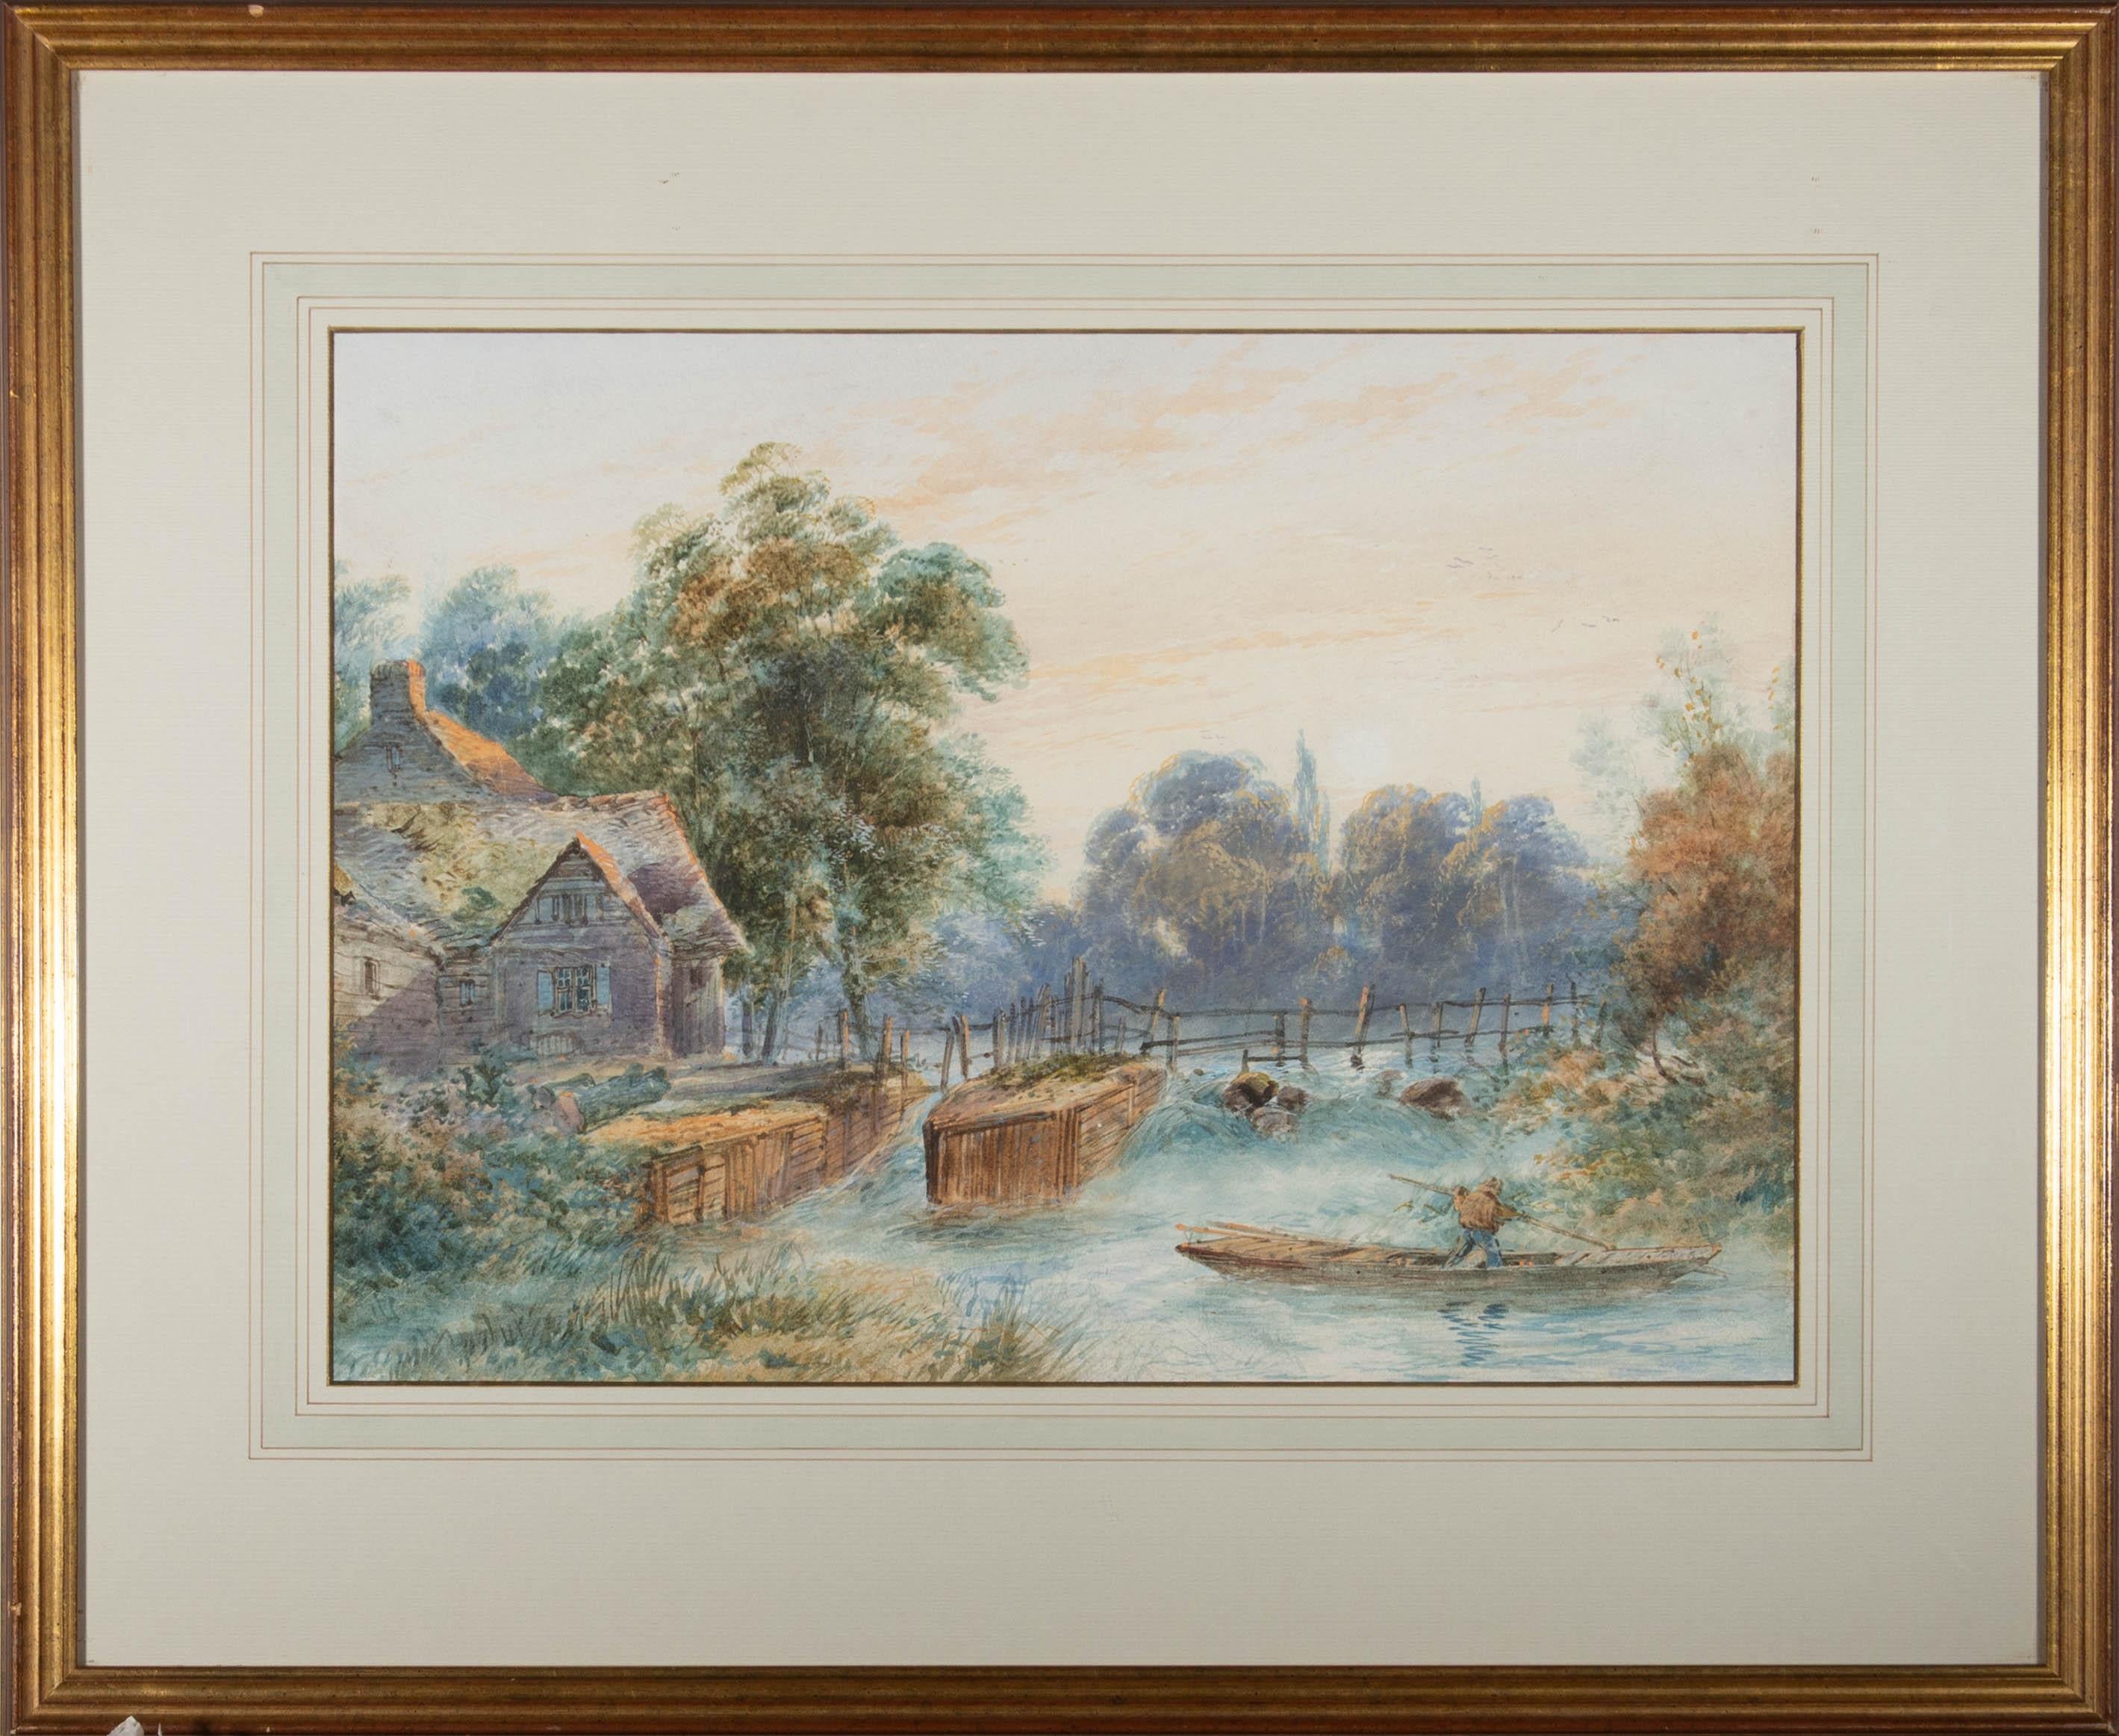 Unknown Landscape Art - Early 20th Century Watercolour - Figure on Boat and Cottage